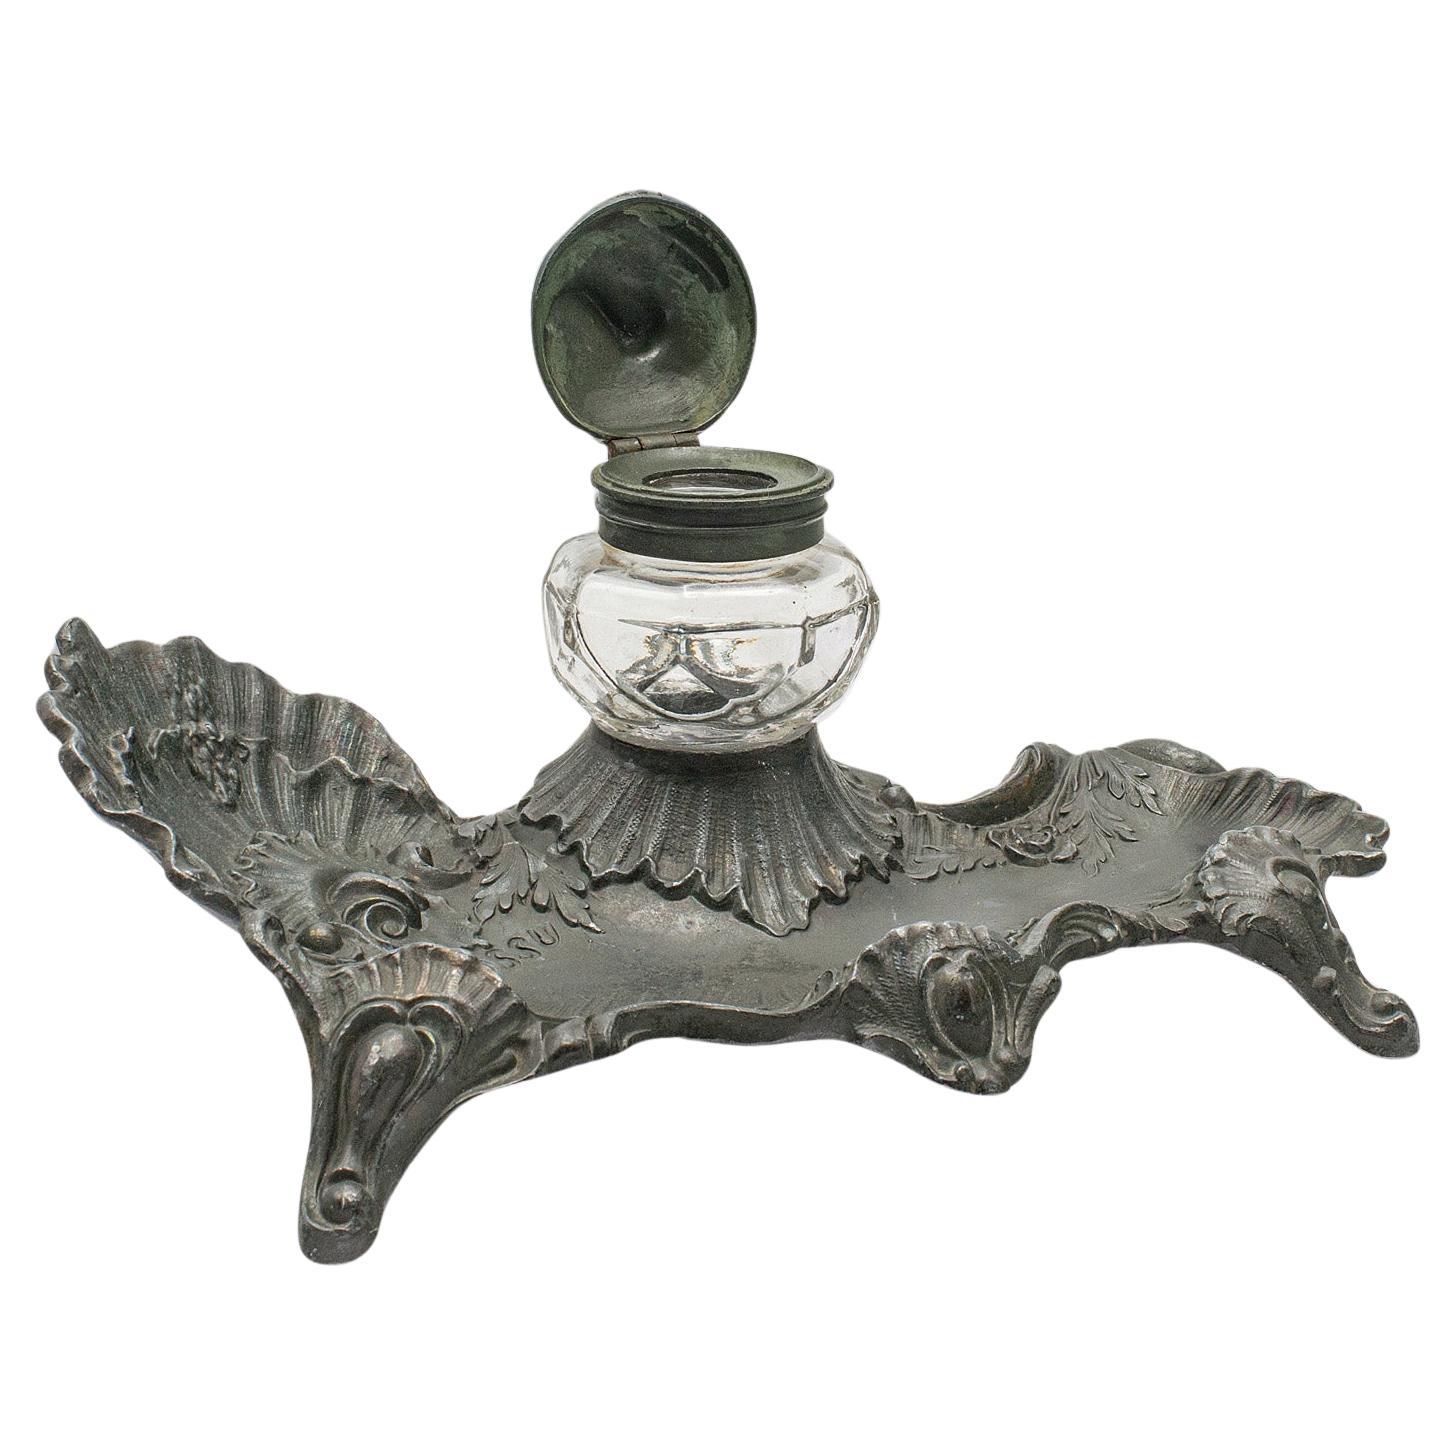 Antique Art Nouveau Ink Well, French, Pewter, Decorative Pen Tray, Victorian